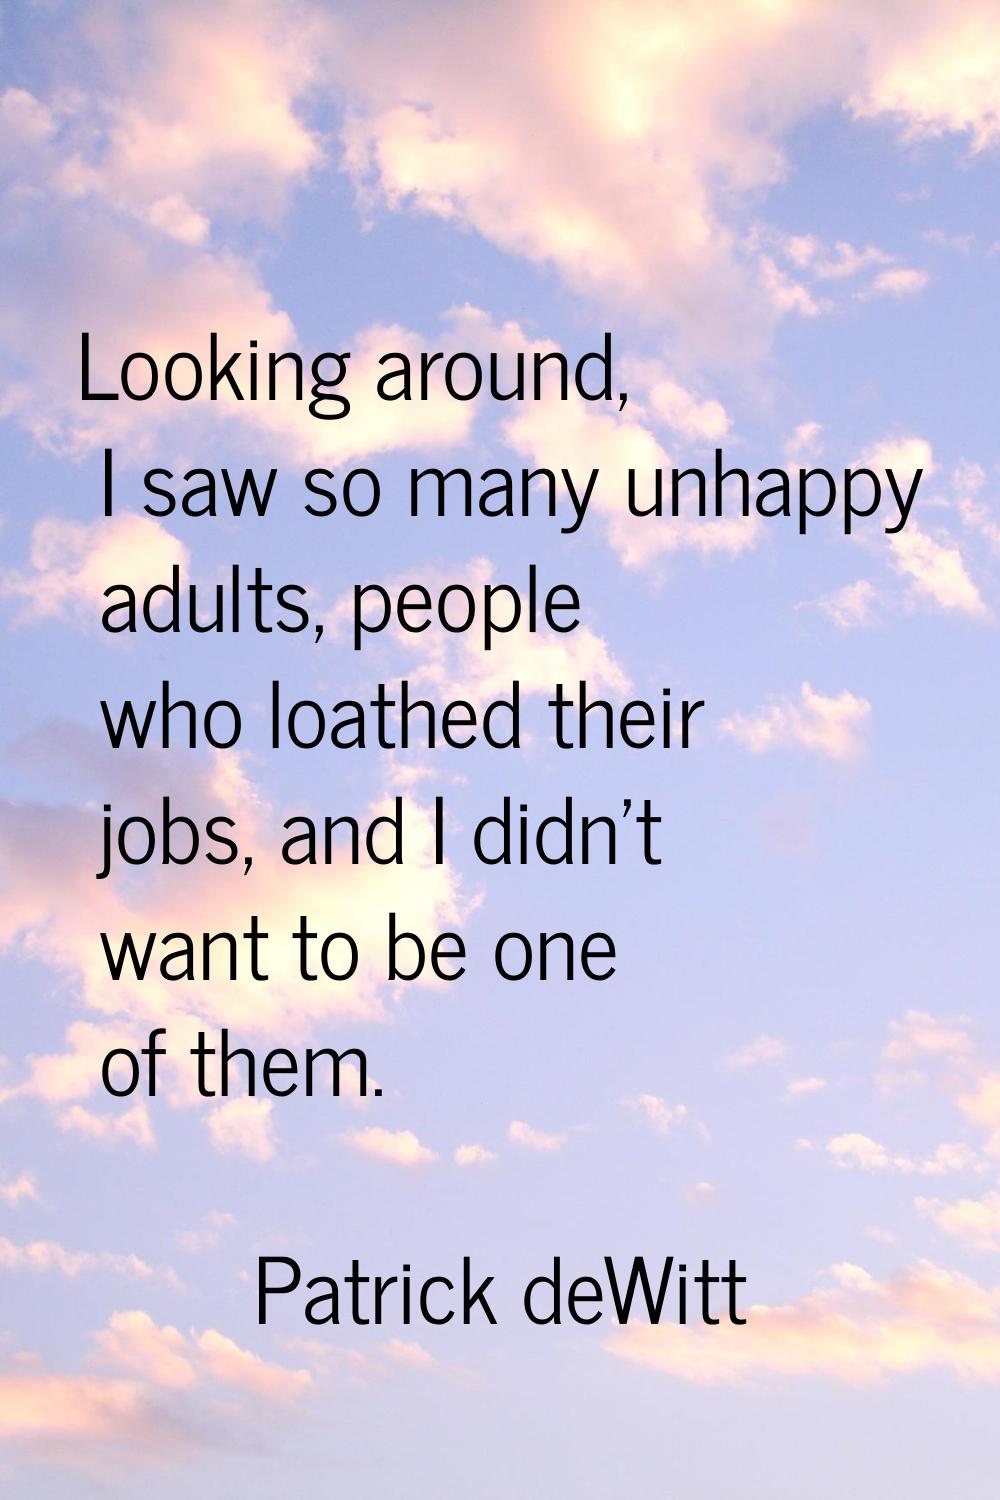 Looking around, I saw so many unhappy adults, people who loathed their jobs, and I didn't want to b